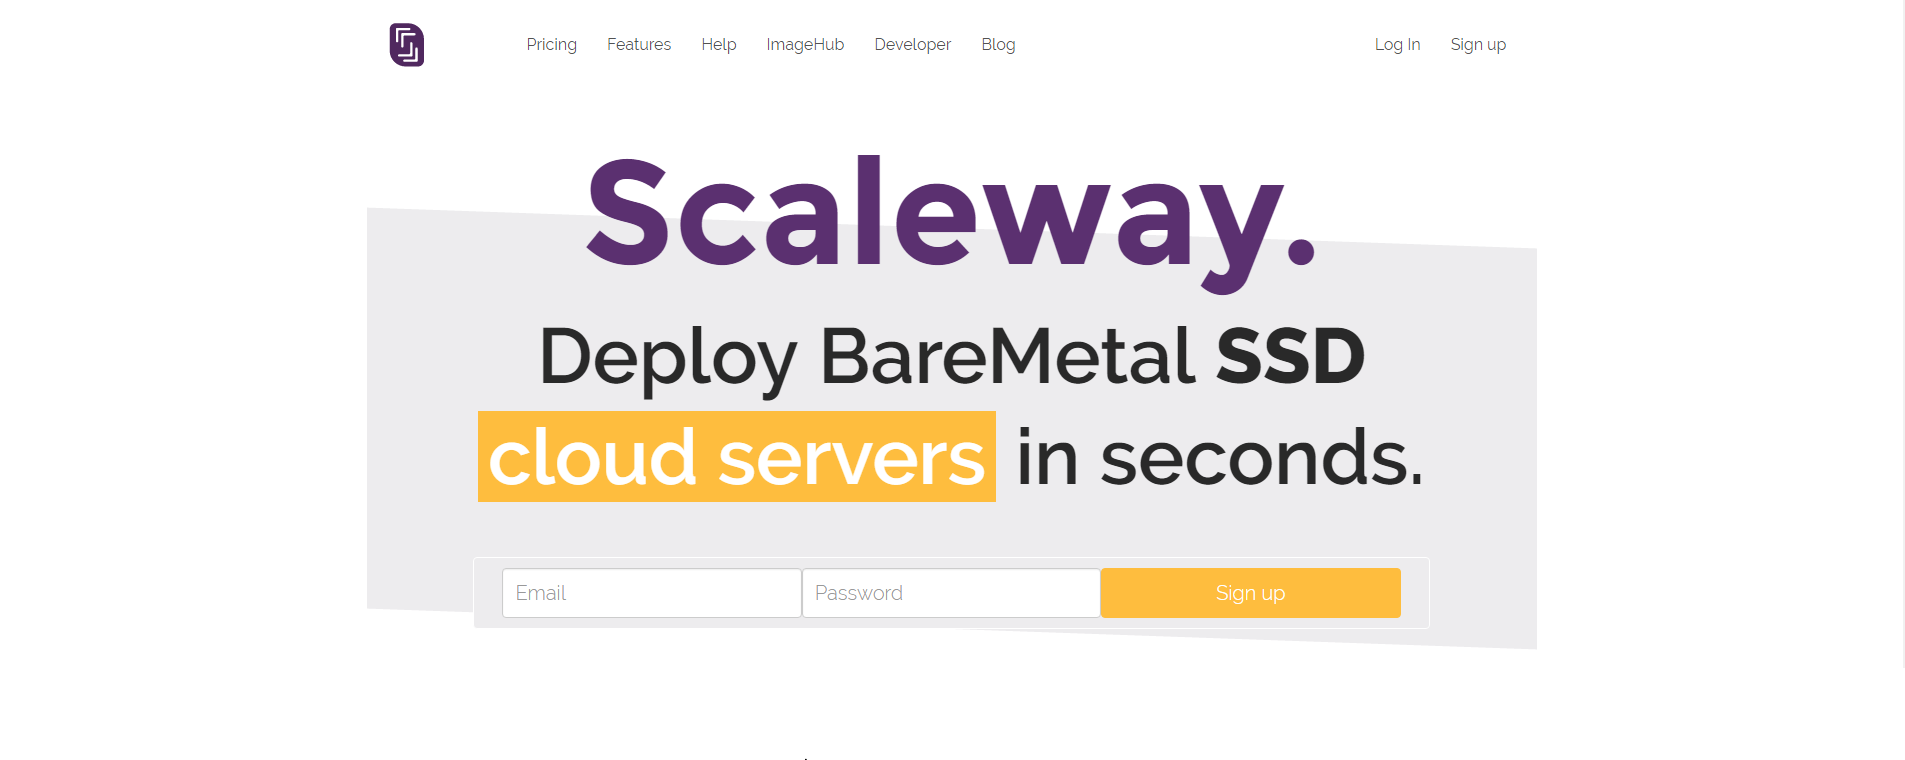 First experience with Scaleway cloud servers